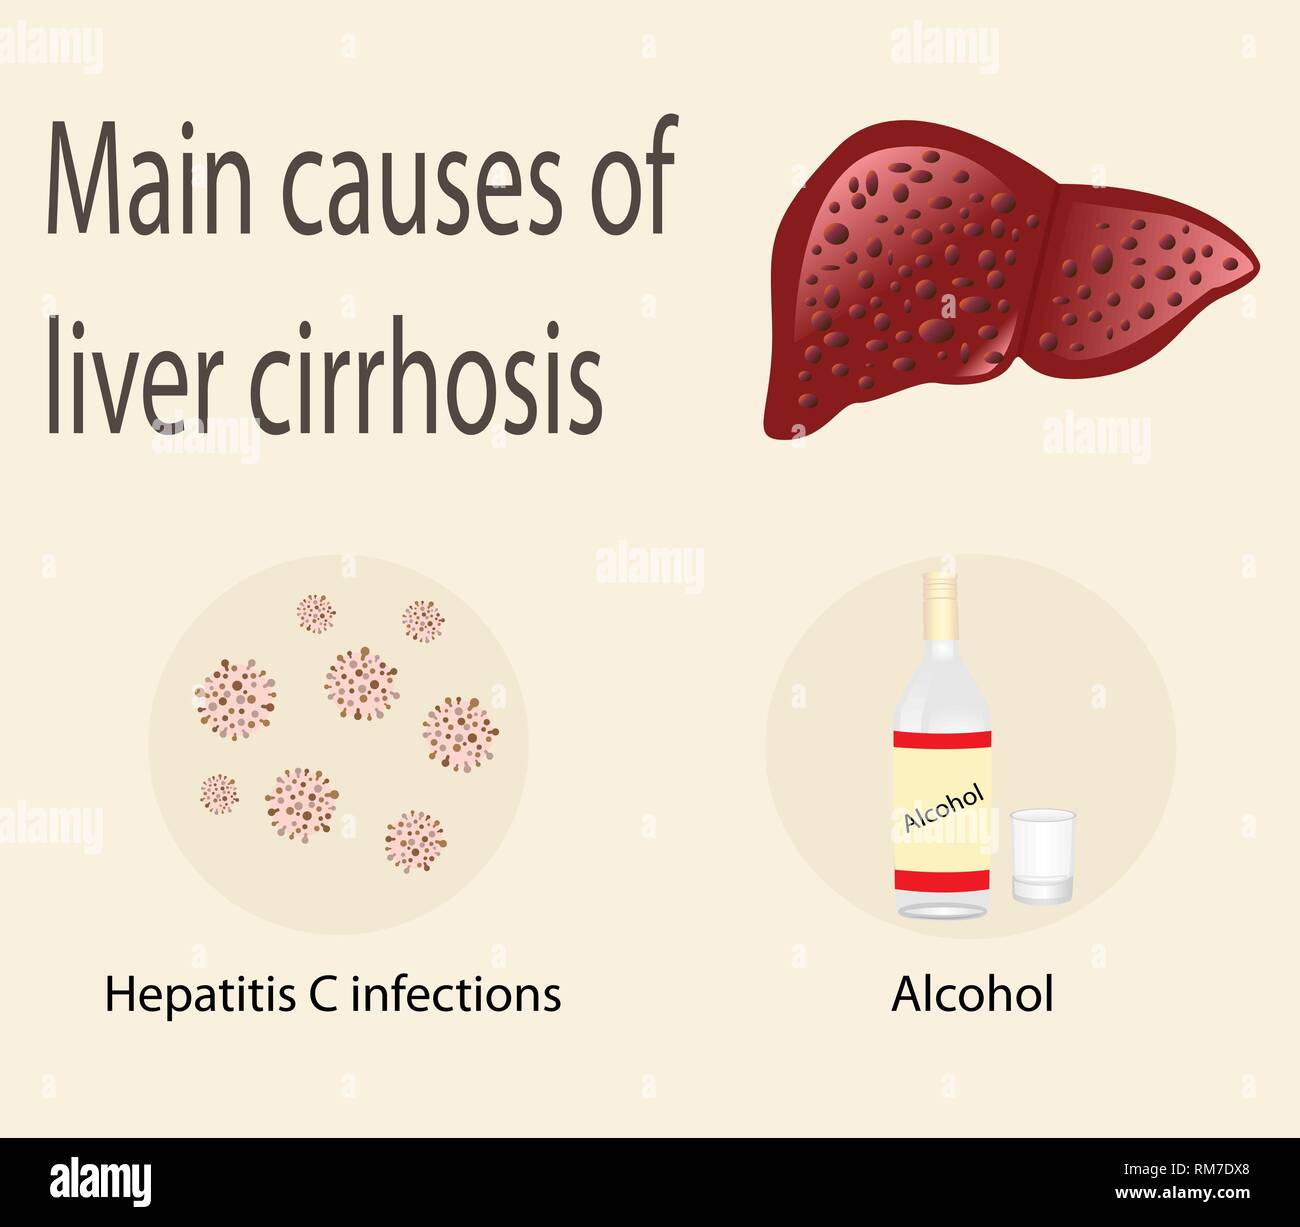 Main causes of liver cirrhosis hepatitis C infection and alcohol vector ...